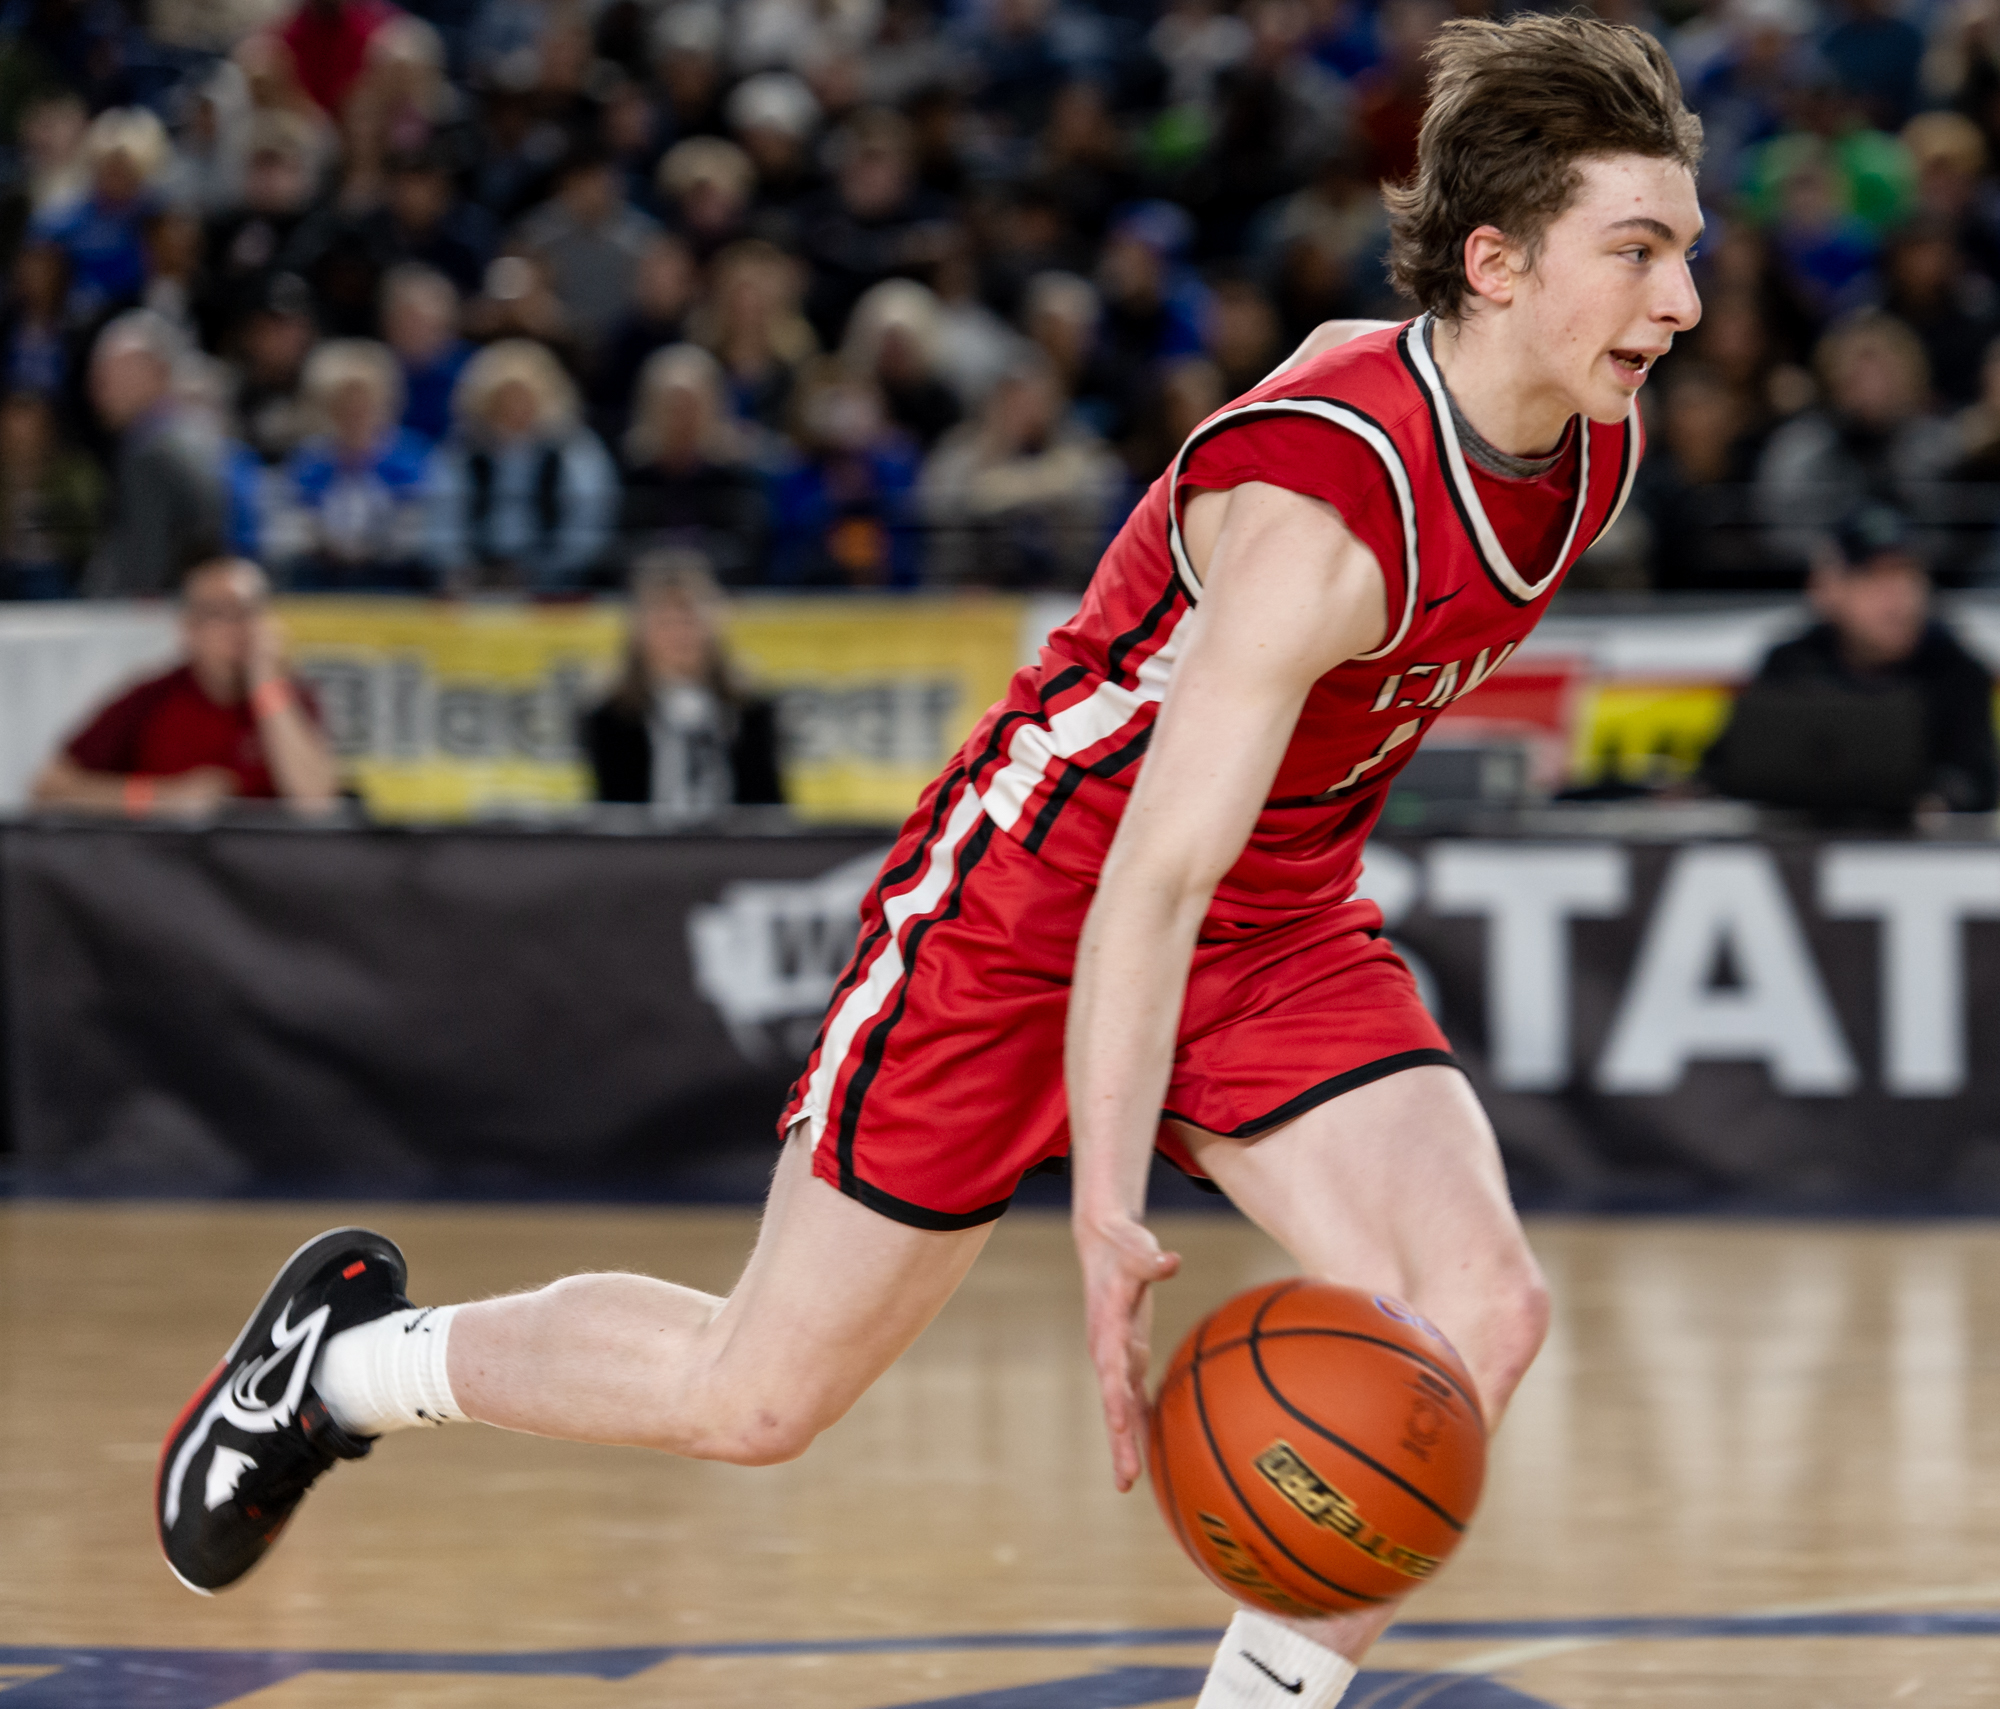 Camas sophomore guard Beckett Currie dribbles up court during a Class 4A State quarterfinal game on Thursday, March 2, 2023, at the Tacoma Dome.